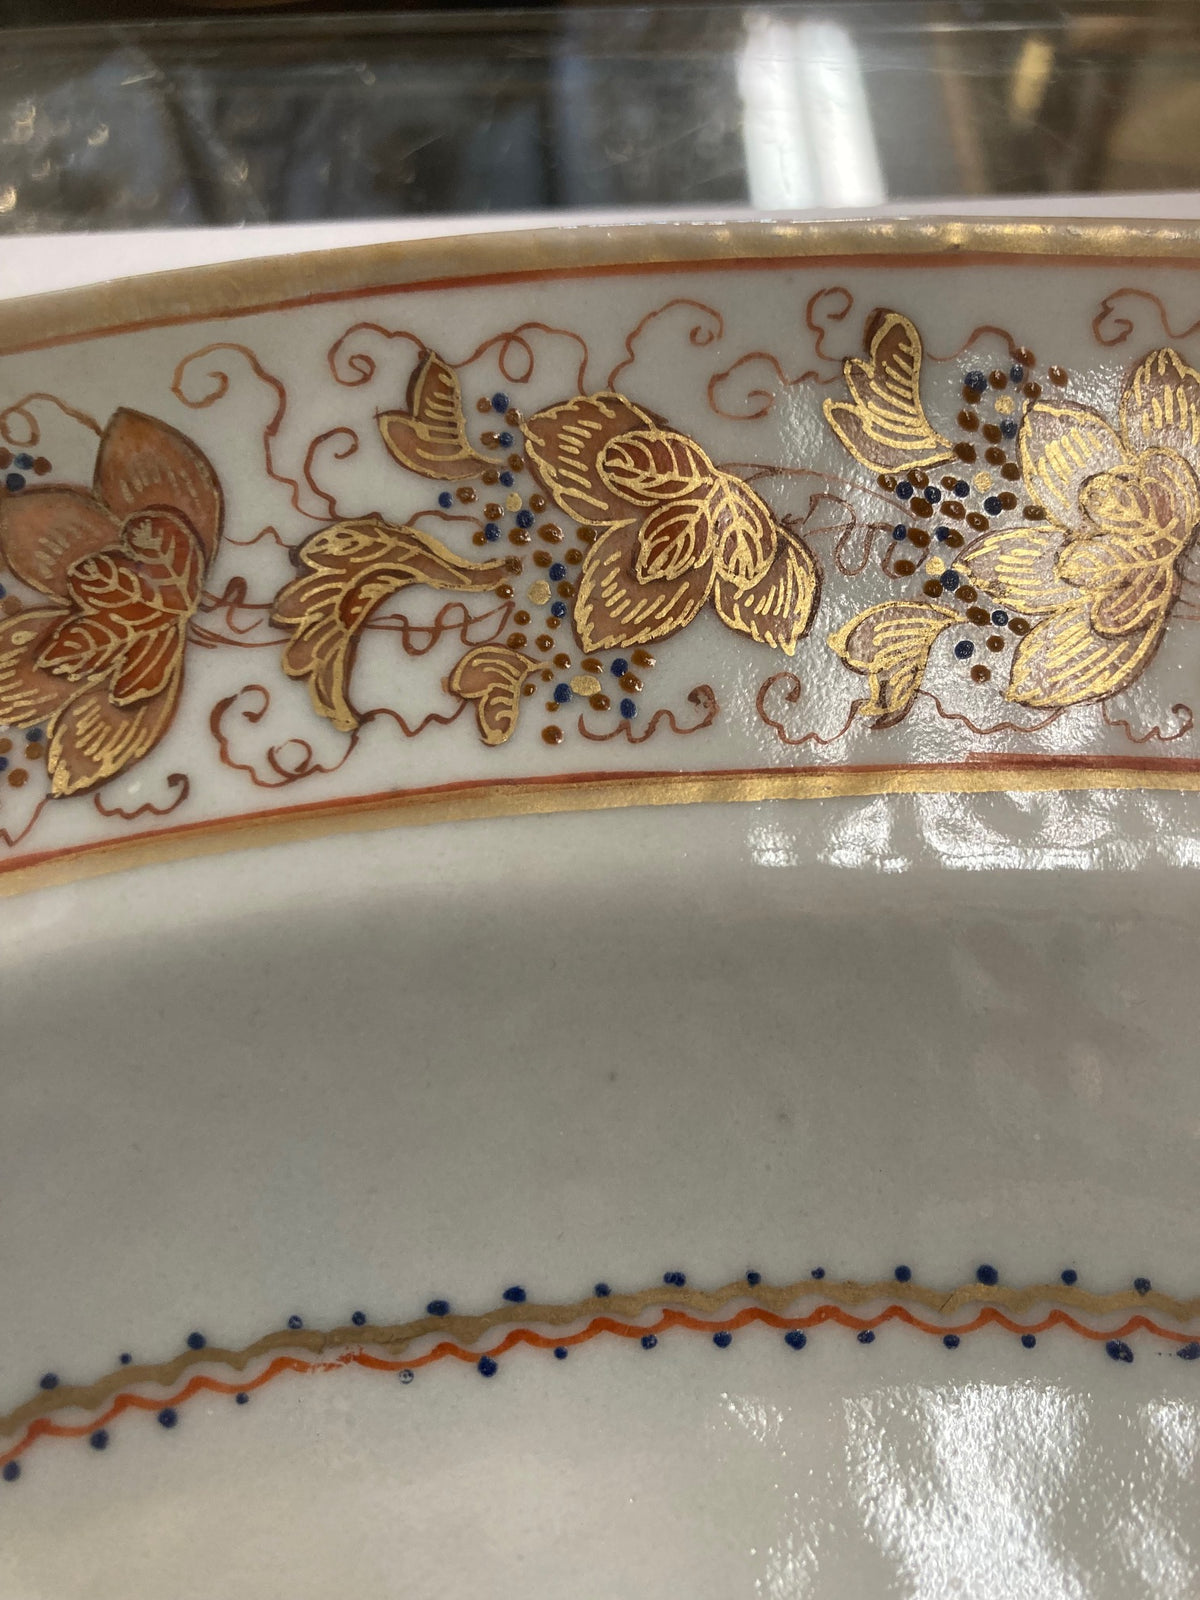 Chinese Export Large Platter